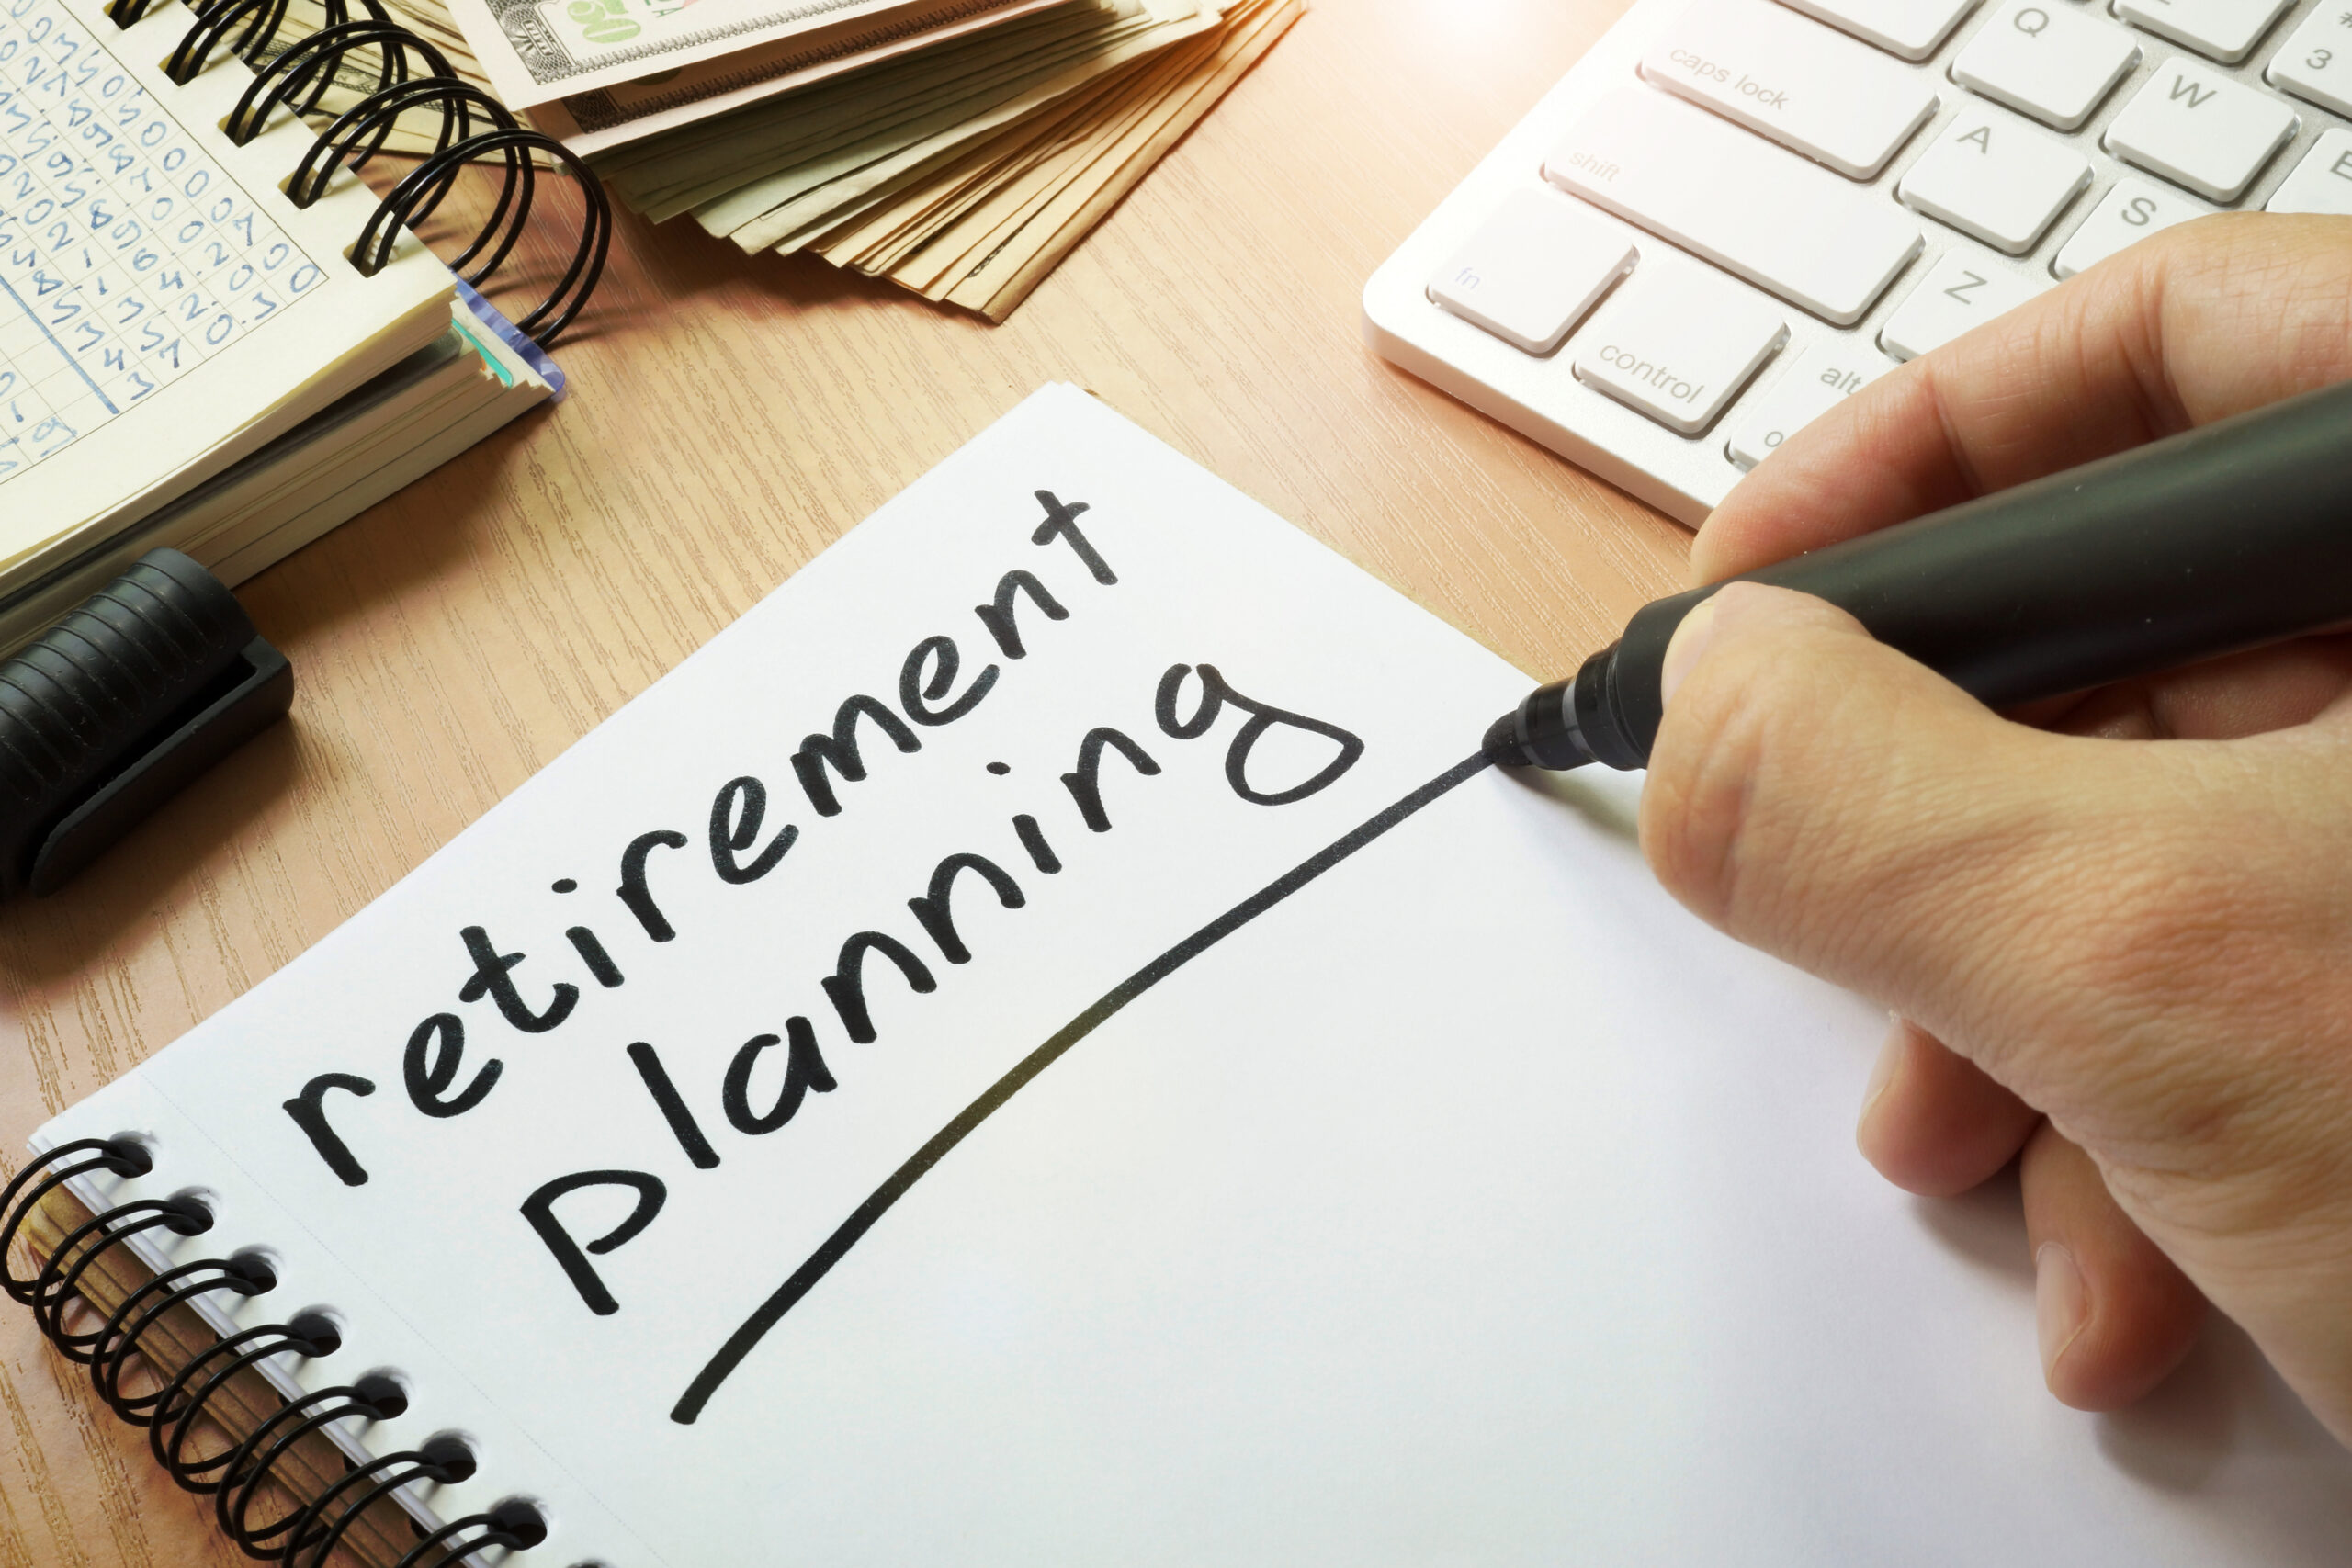 How to Make the Florida Retirement System Investment Plan an Effective Retirement Plan